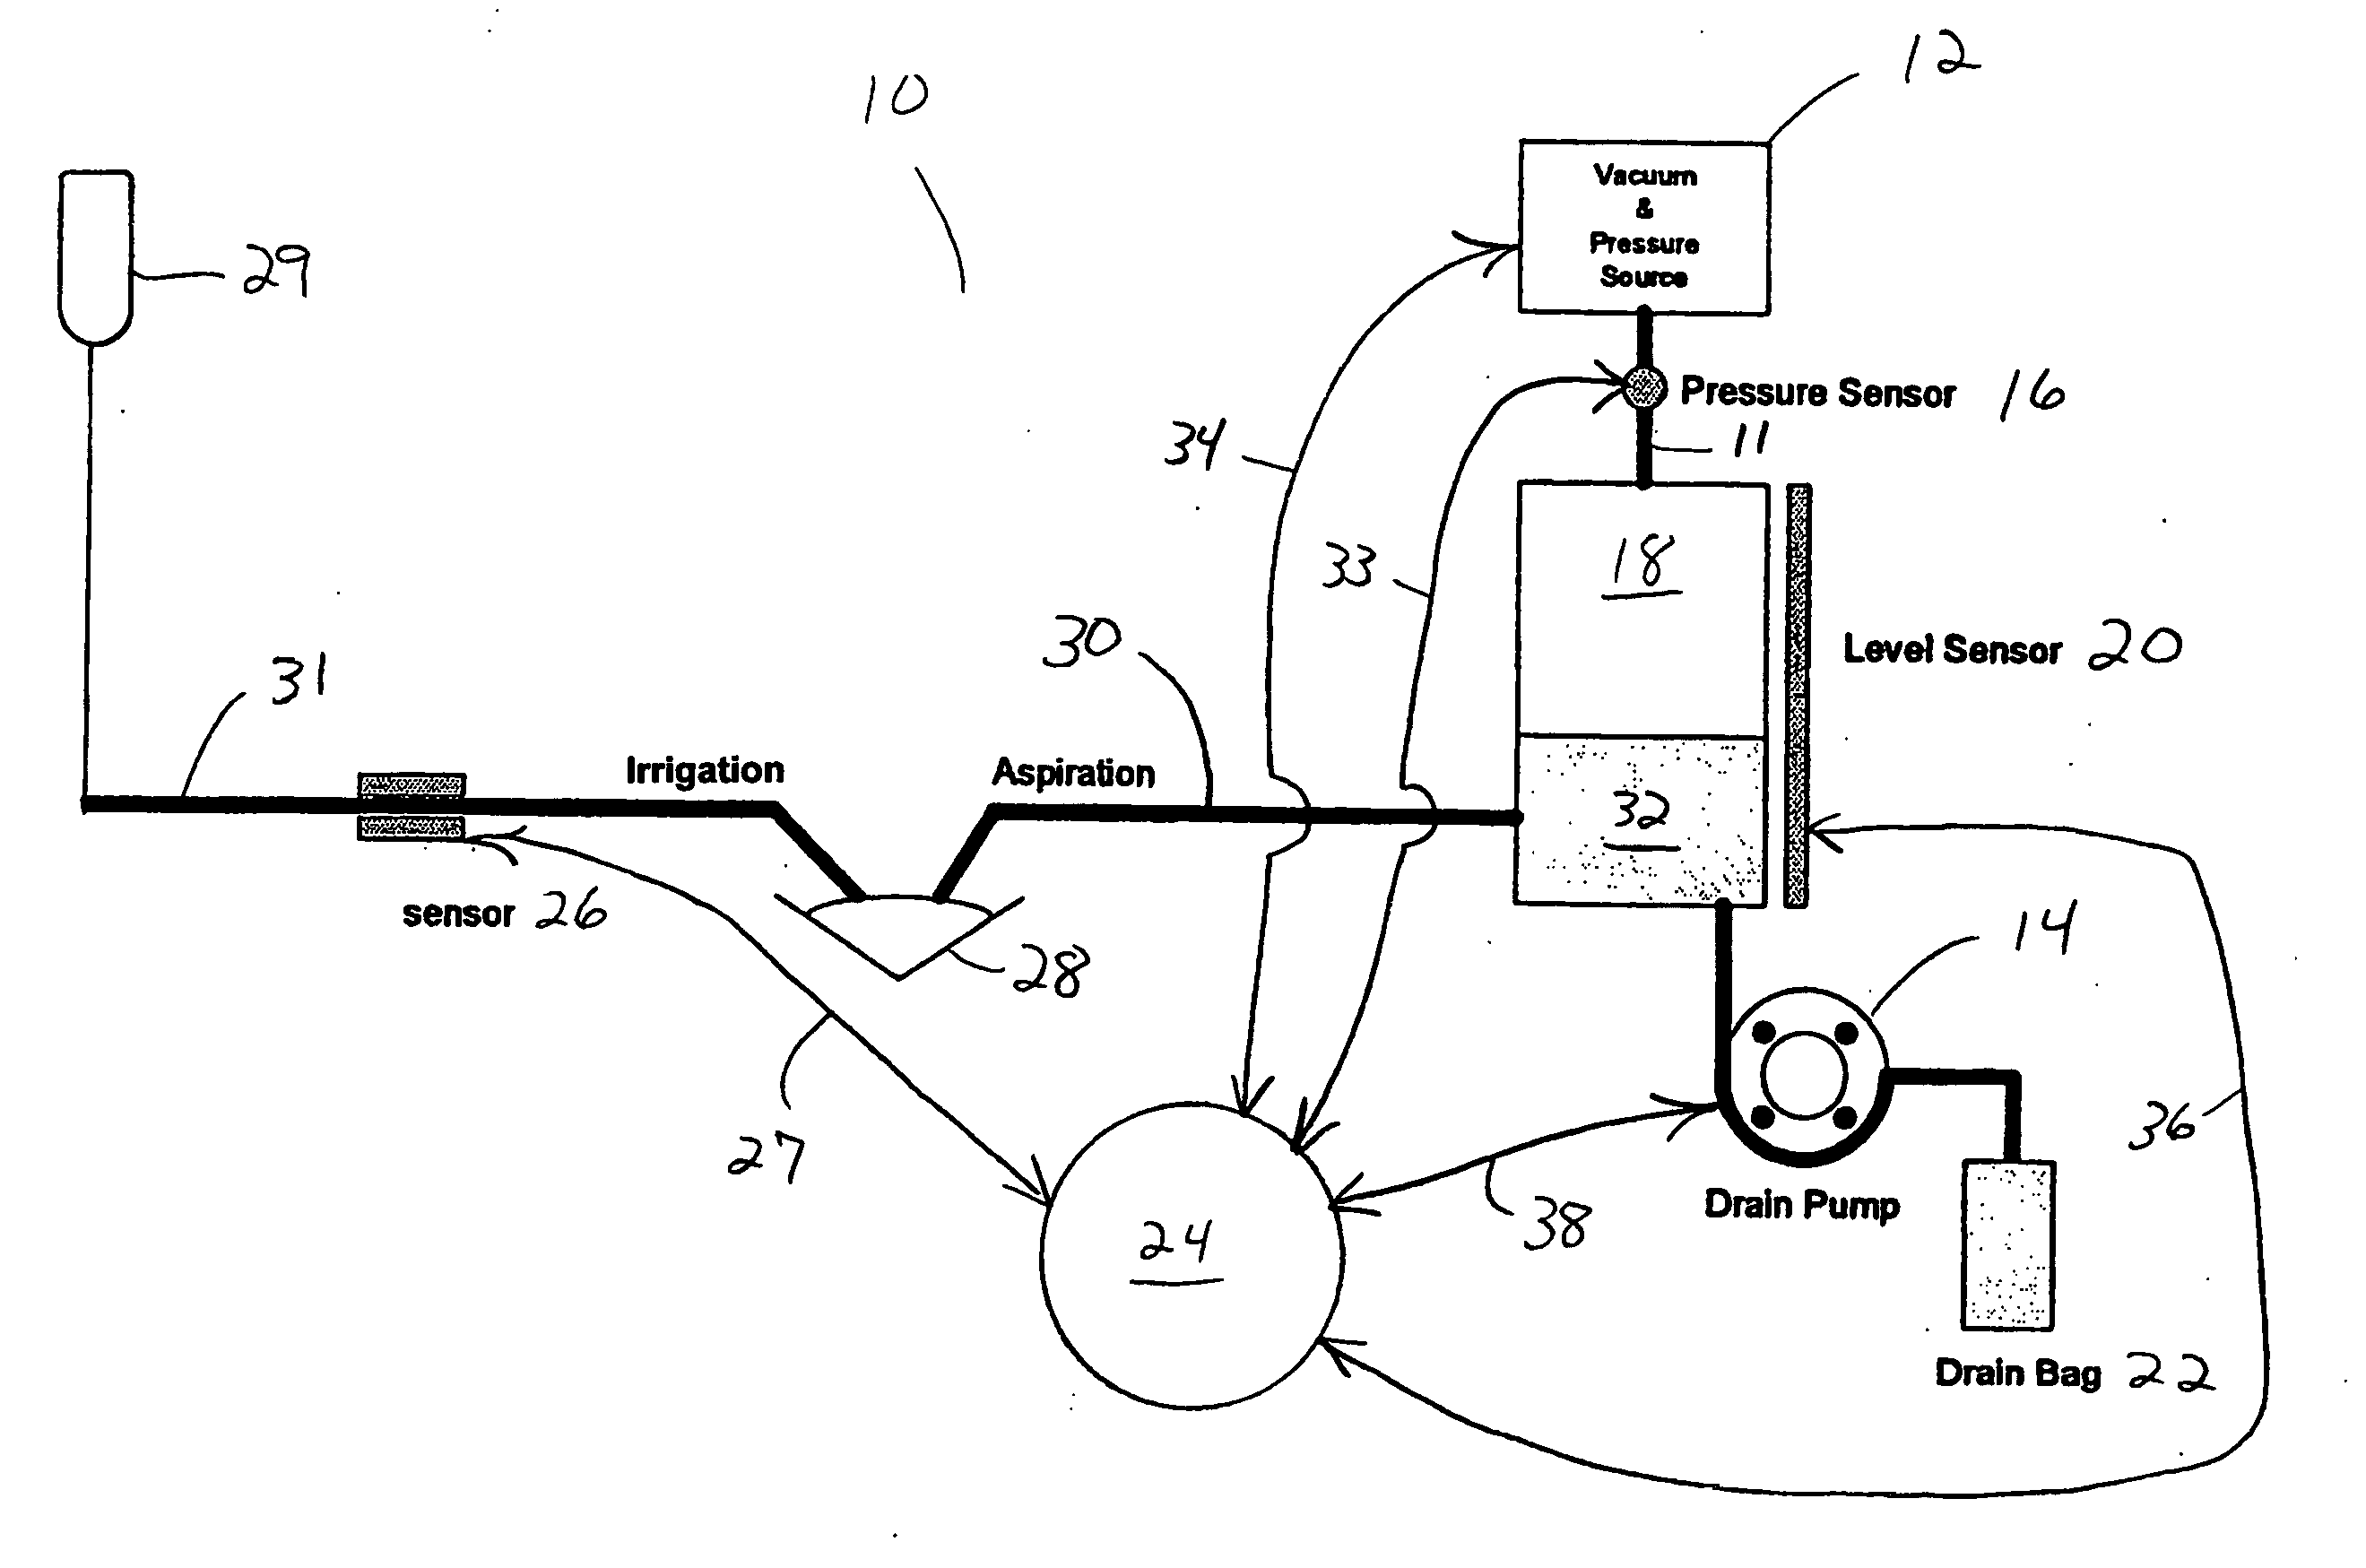 Method of controlling an irrigation/aspiration system